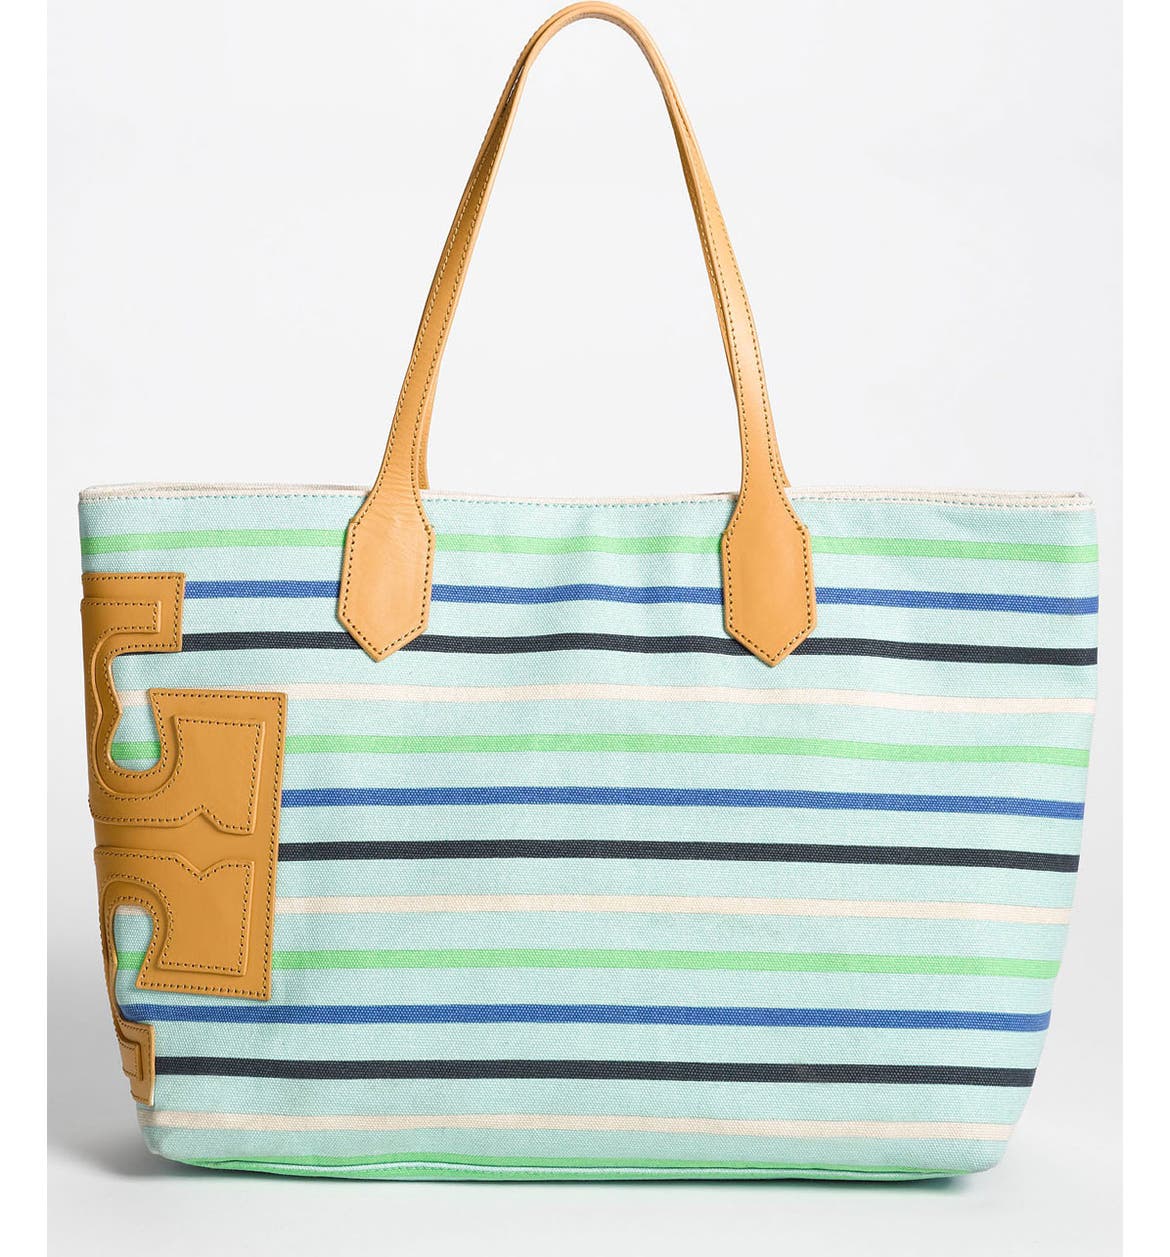 Tory Burch 'Stacked T' Tote | Nordstrom